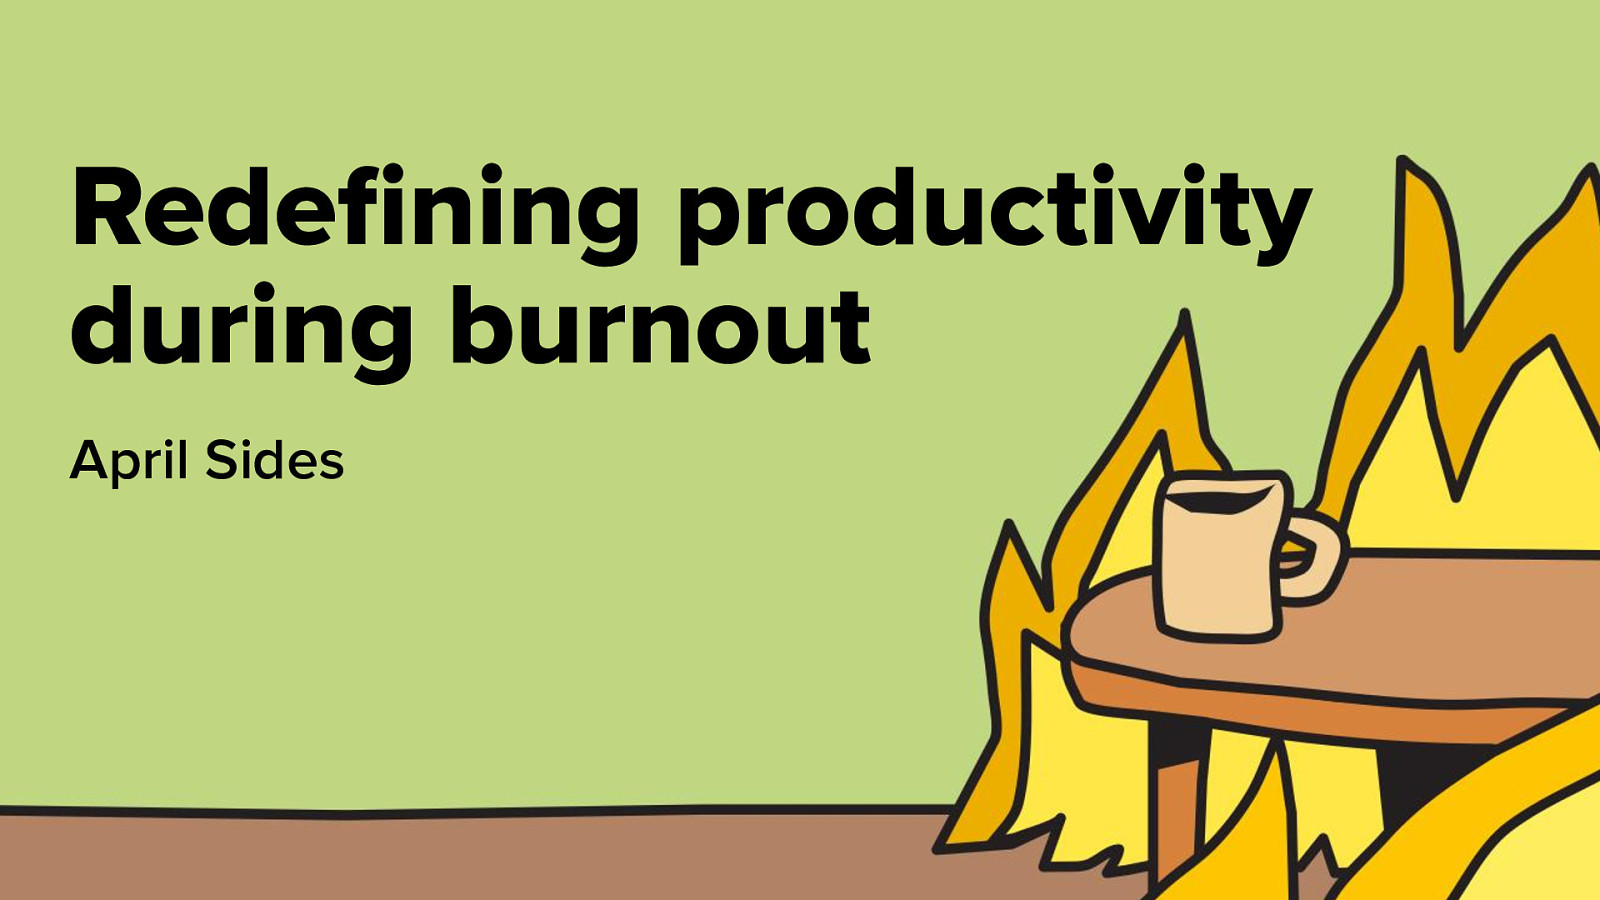 Redefining productivity during burnout